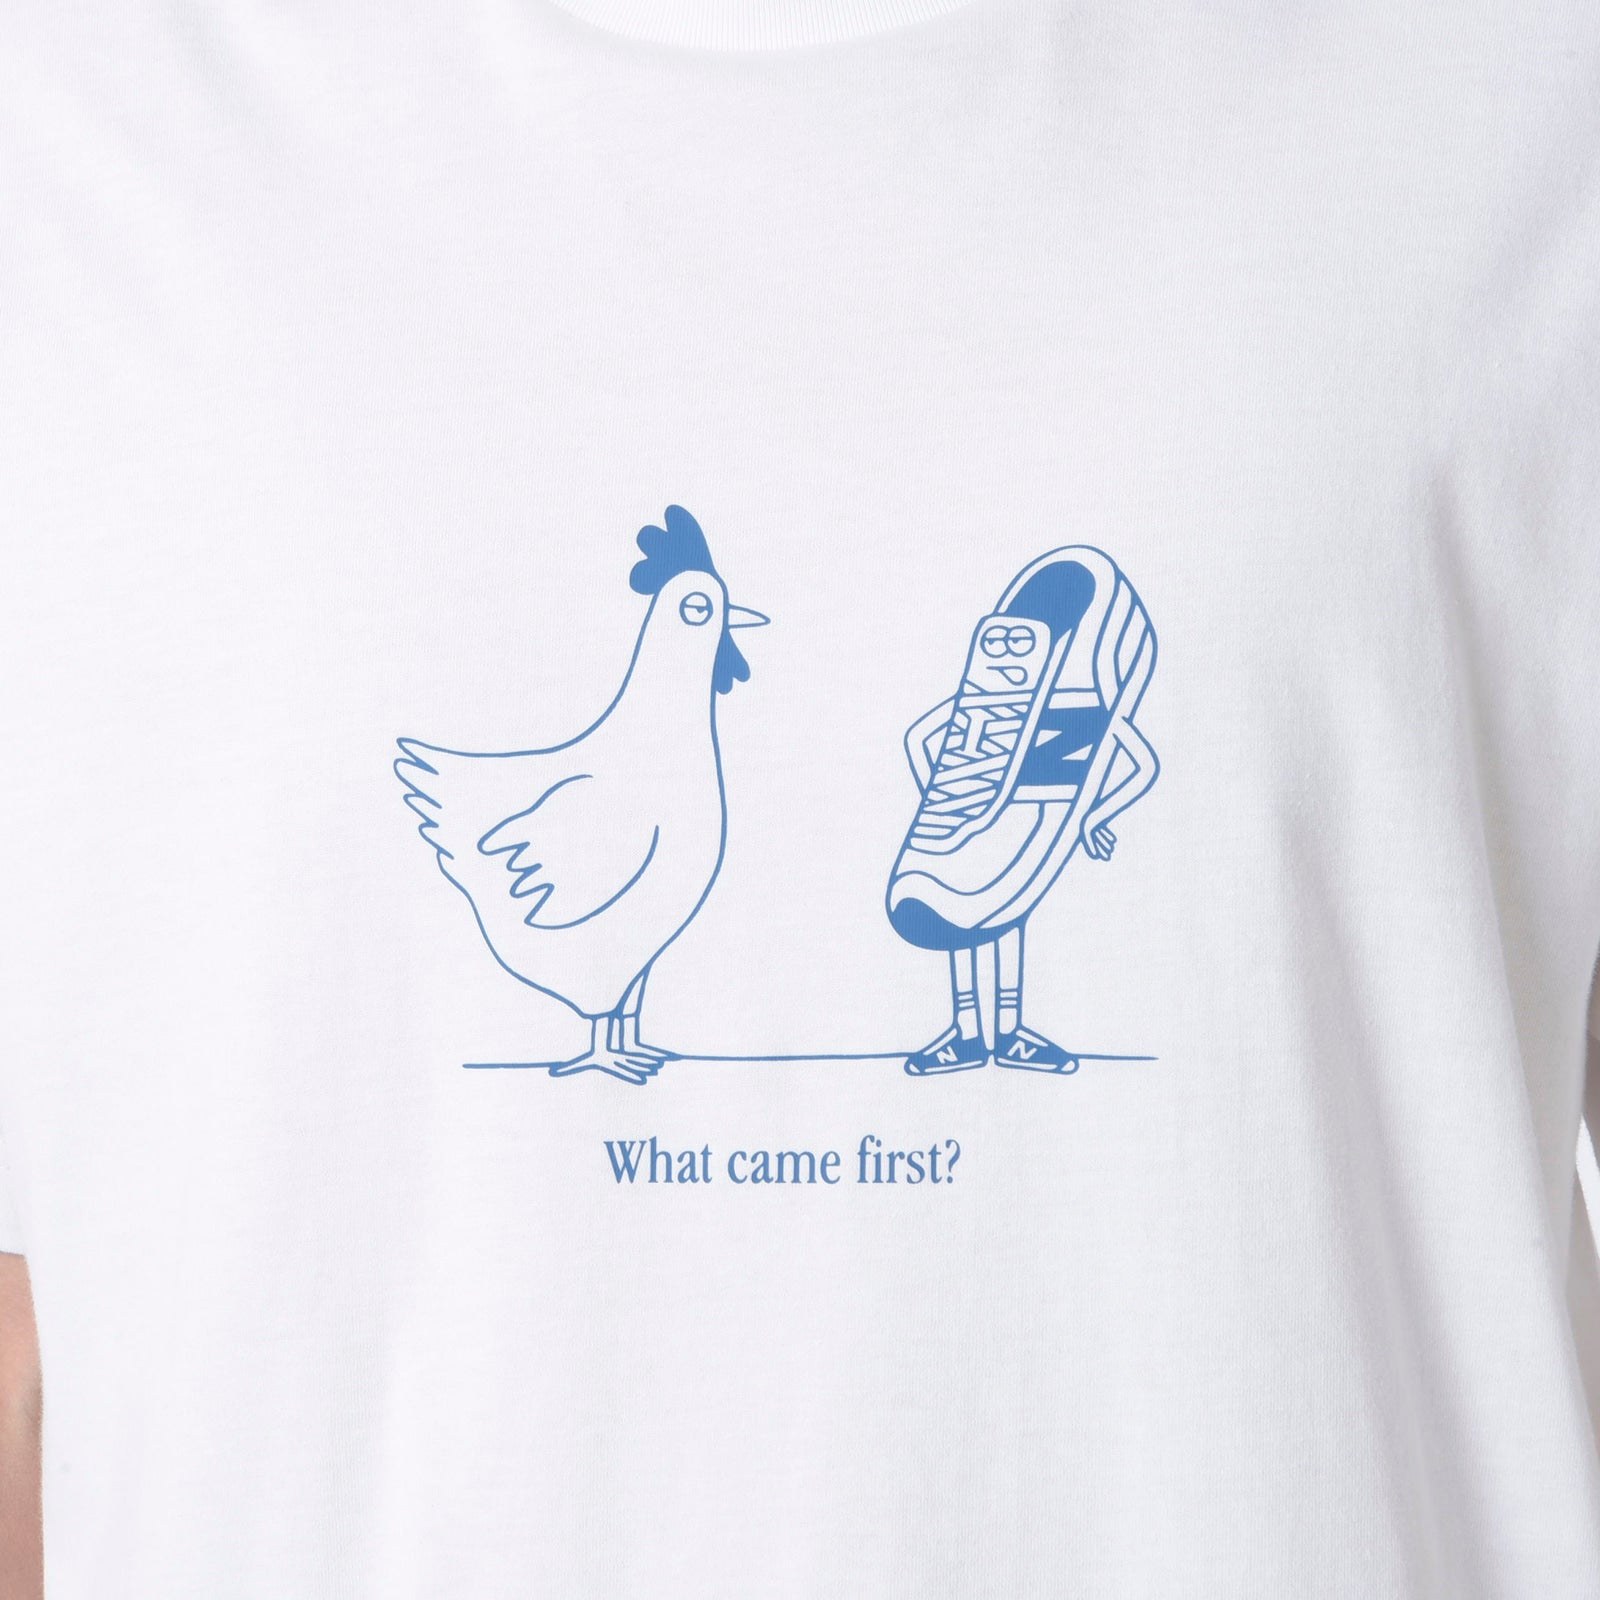 New Balance Chicken Or Shoe Relaxed Short Sleeve T-Shirt